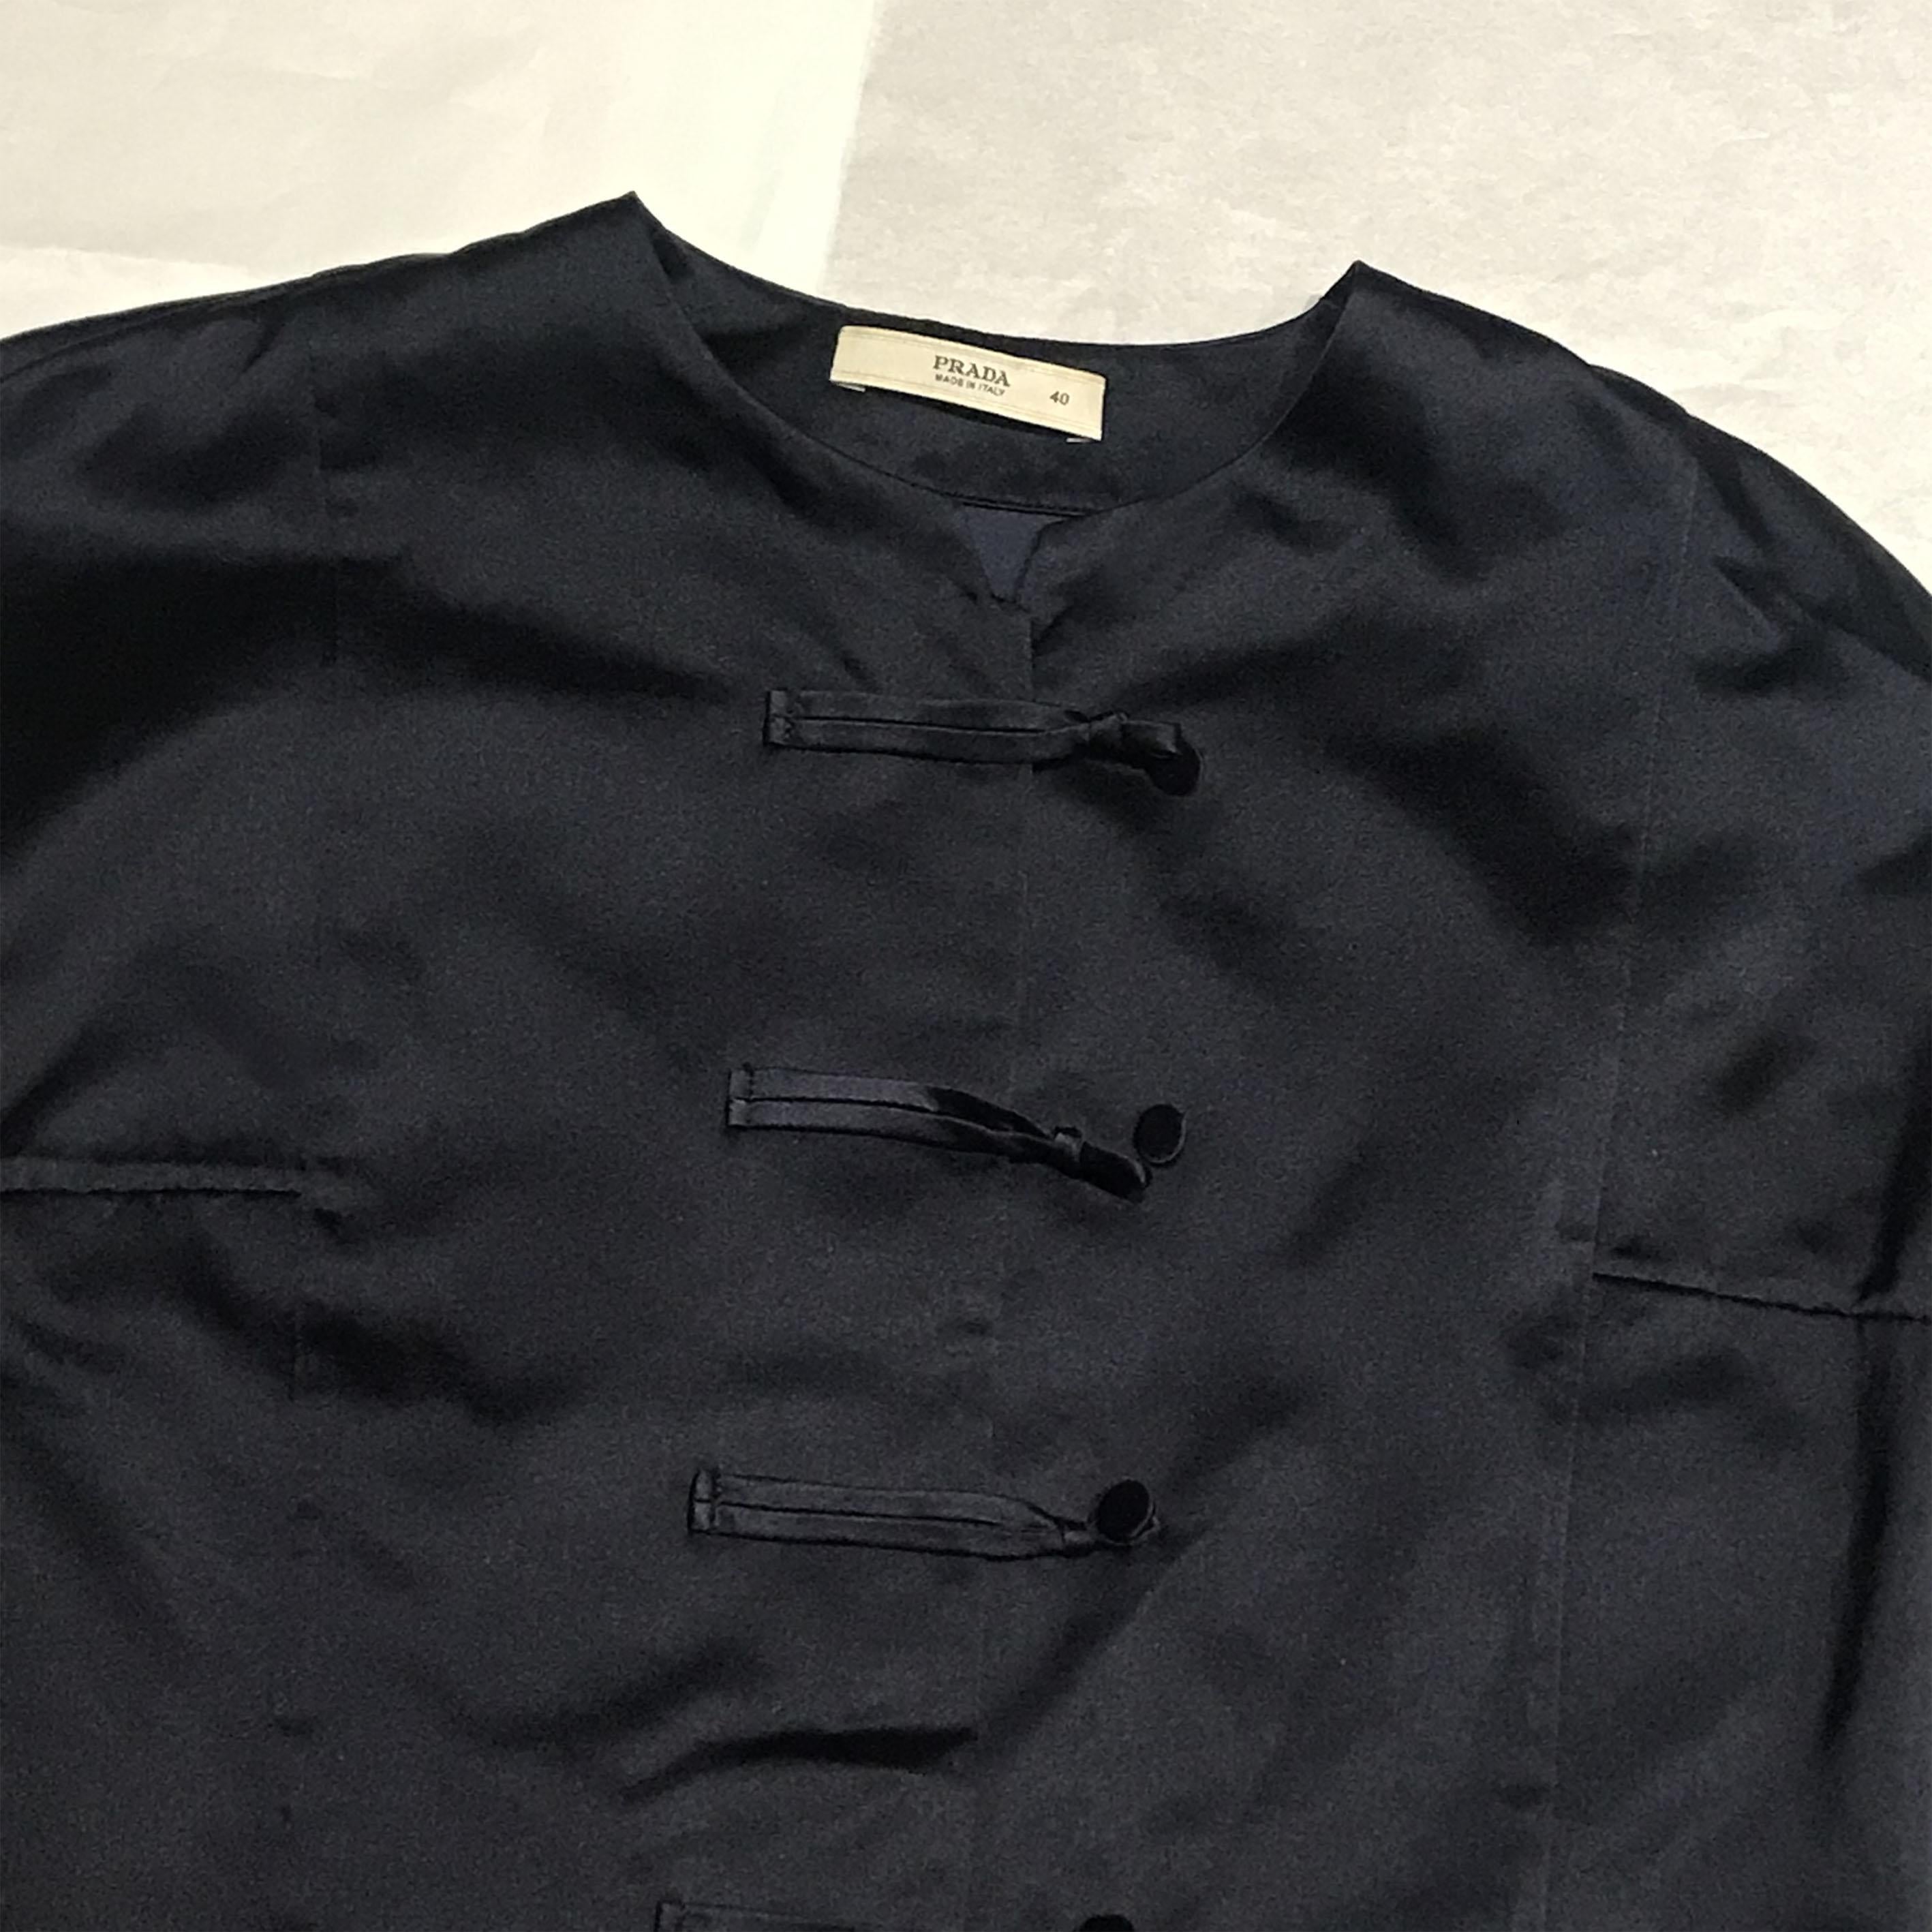 PRADA SS97 Night blue silk mao shirt

Tag PRADA

Size M

Shoulder 42cm
Chest 40cm
Length 50cm
Sleeve 50cm

100% silk

Close with 5 hidden buttons + 5 mao ones

Perfect condition

Shipping worldwide with tracking number